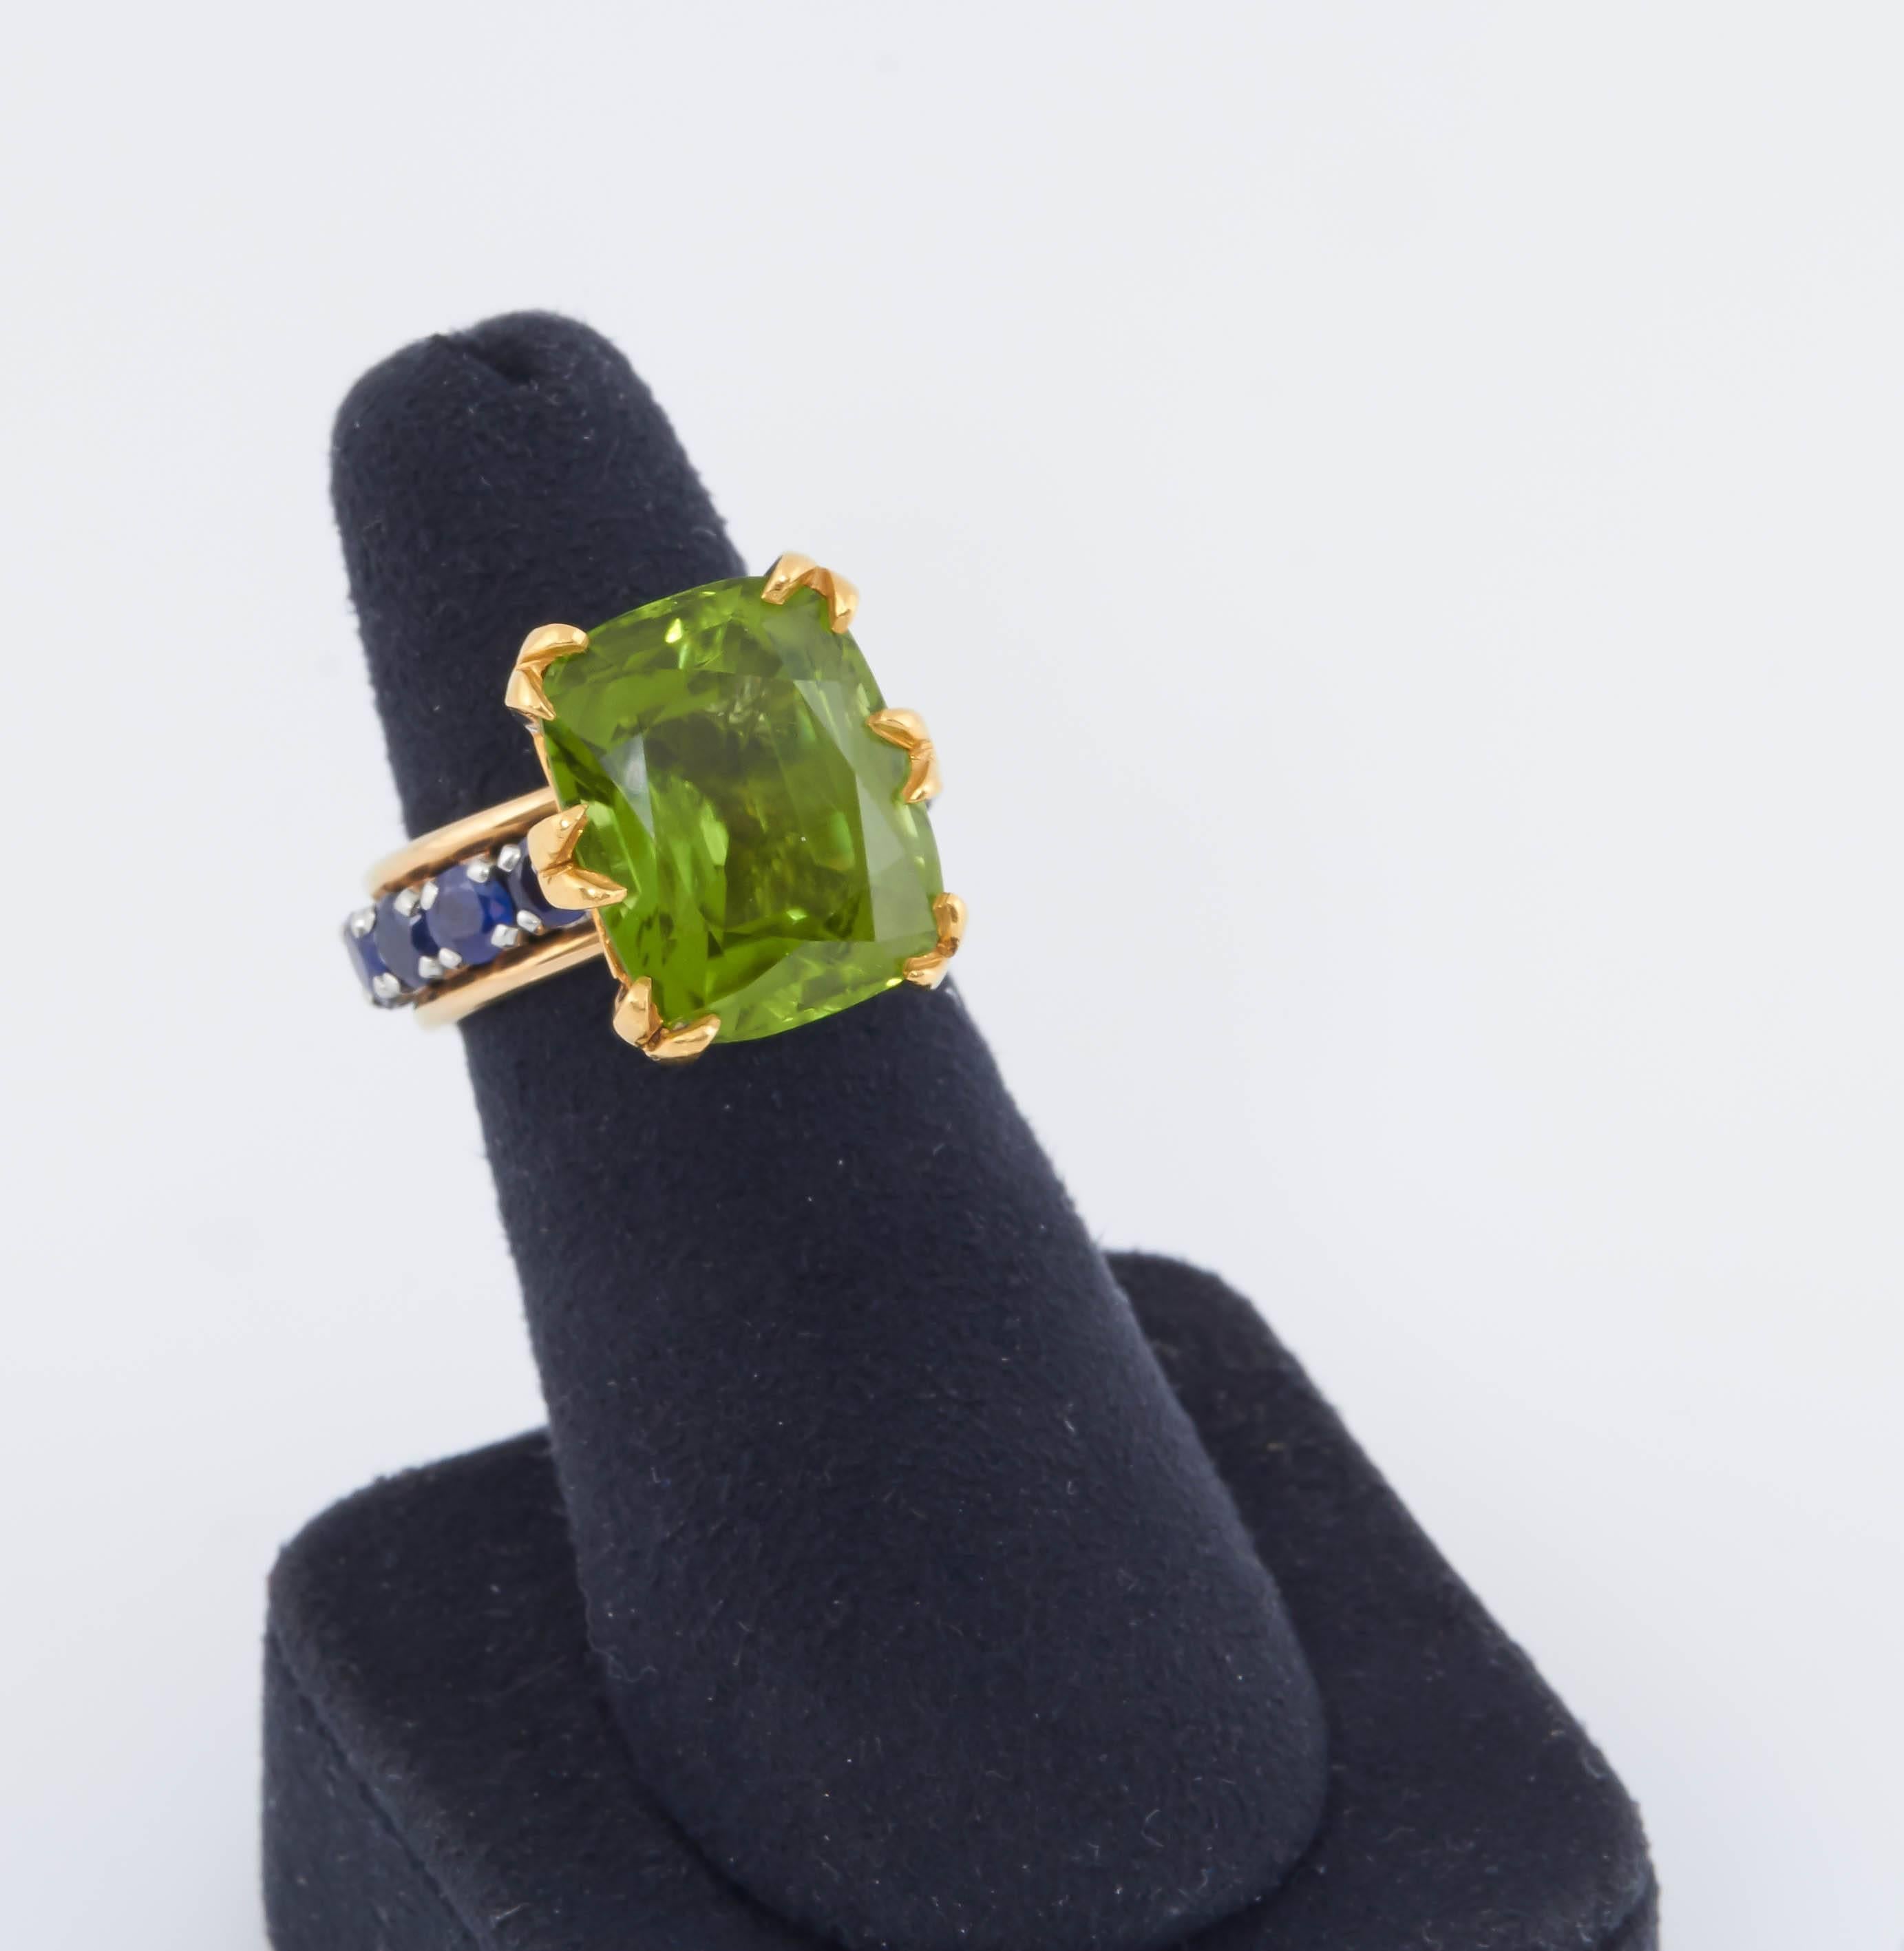 This 18K Tiffany & Co. Schlumberger Ring features a vibrant Peridot with sapphires that decorate the band all around. The ring is currently a size 5 1/4. It has a special gold spring/band inside for ring size adjustment. If the spring were to be